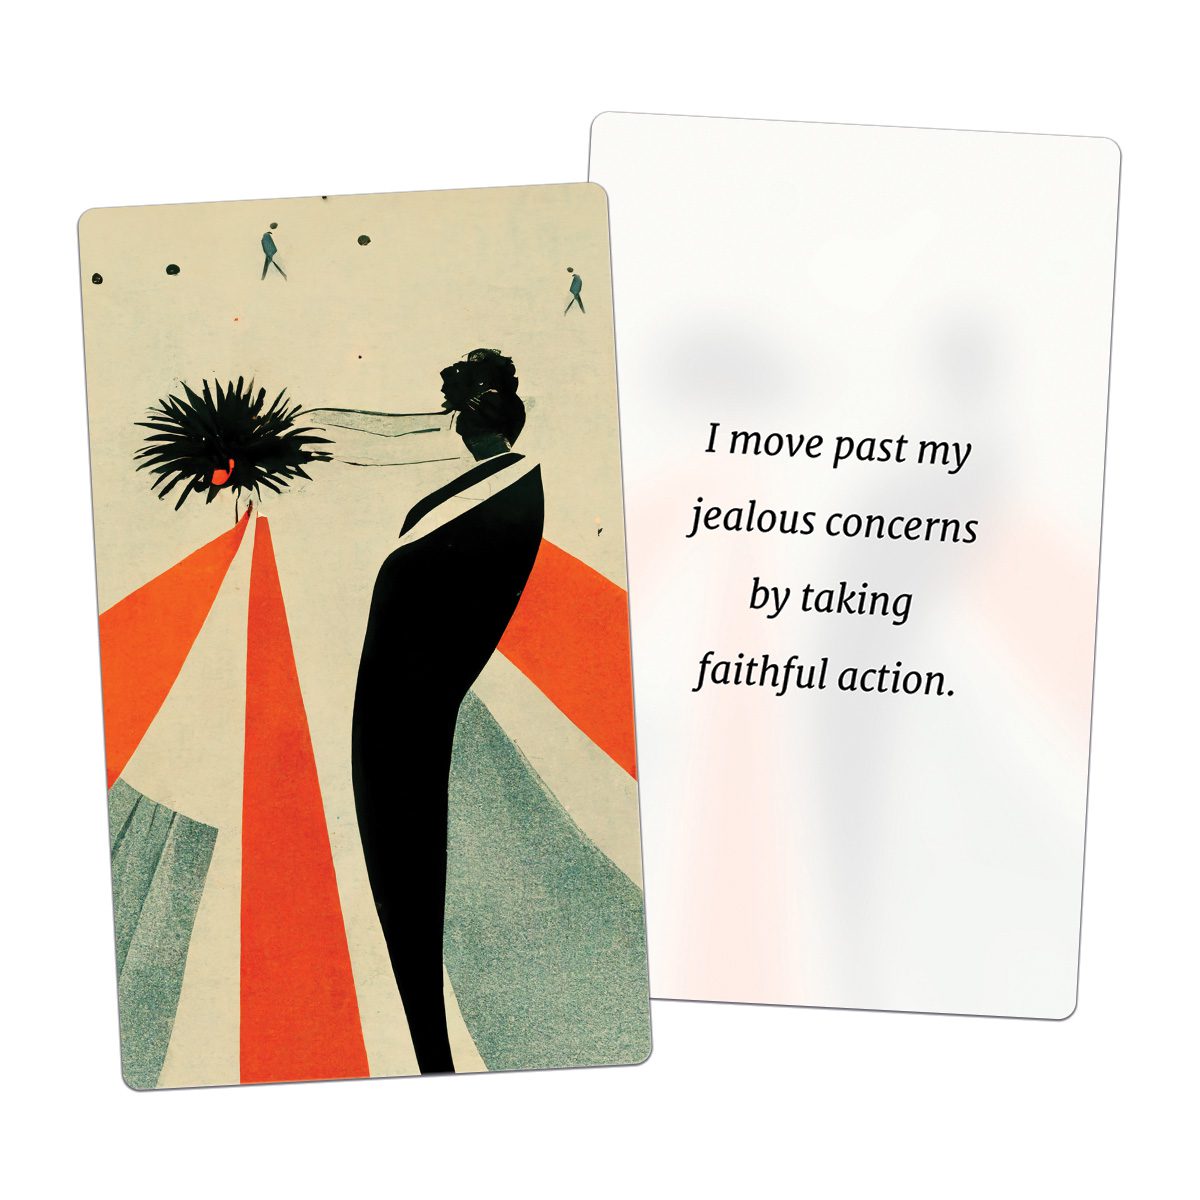 I move past my jealous concerns by taking faithful action. (AFFIRMATION CARD MOCKUP)